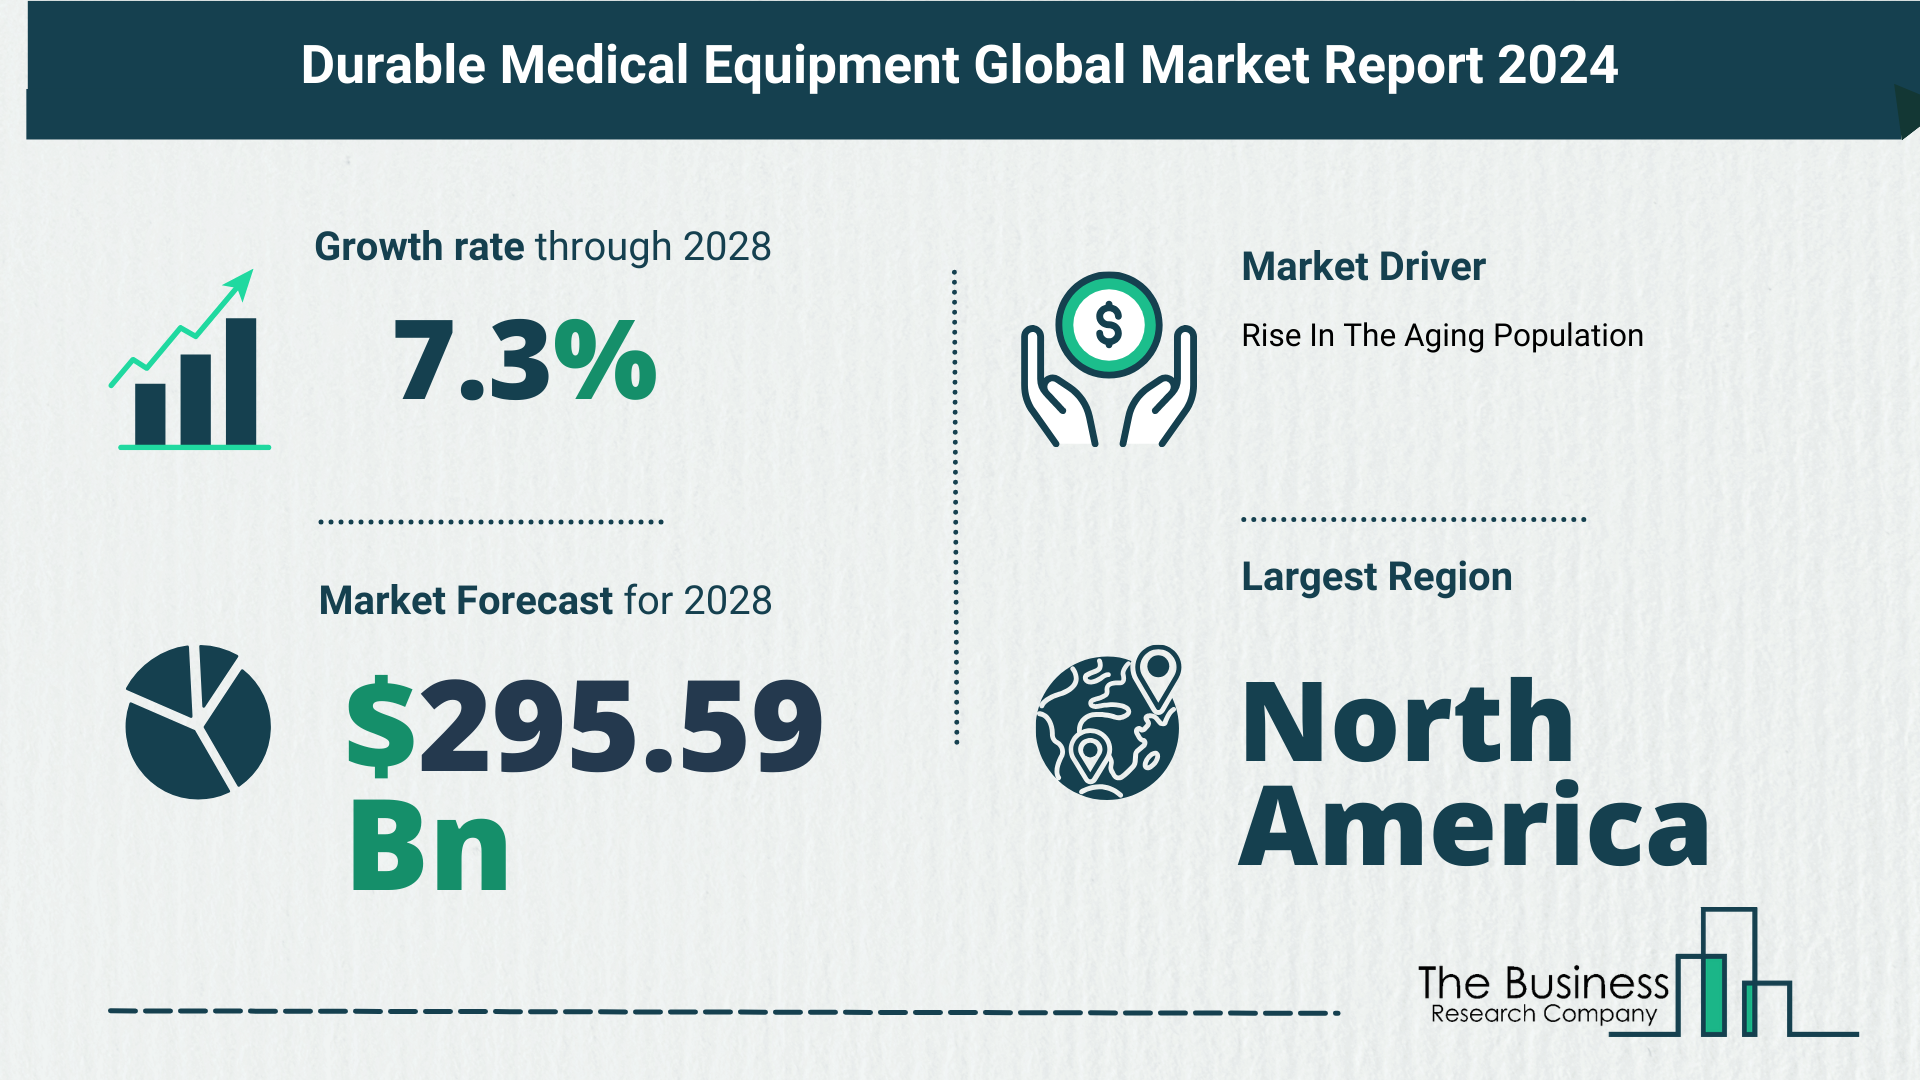 Overview Of The Durable Medical Equipment Market 2024: Size, Drivers, And Trends